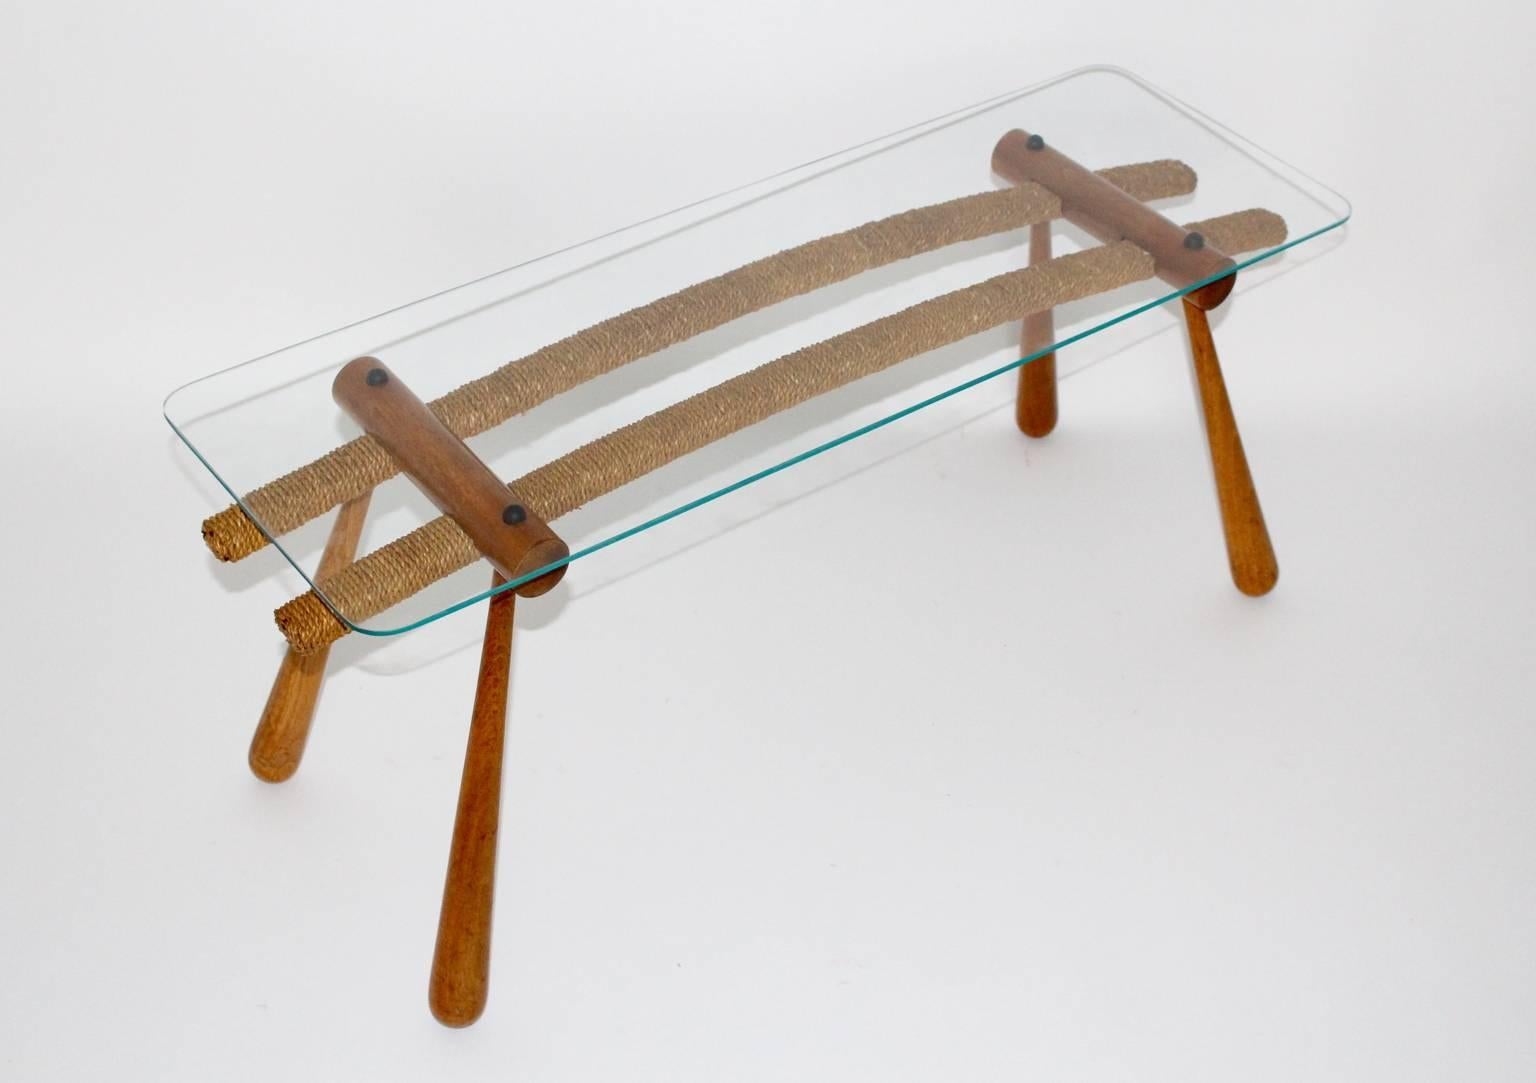 Mid Century Modern vintage coffee table or sofa table from maple and glass designed by Max Kment and executed by Kunstgewerbliche Werkstätten Max Kment, circa 1950.
This coffee table consists of maple tree, cord and a clear glass plate.
The coffee